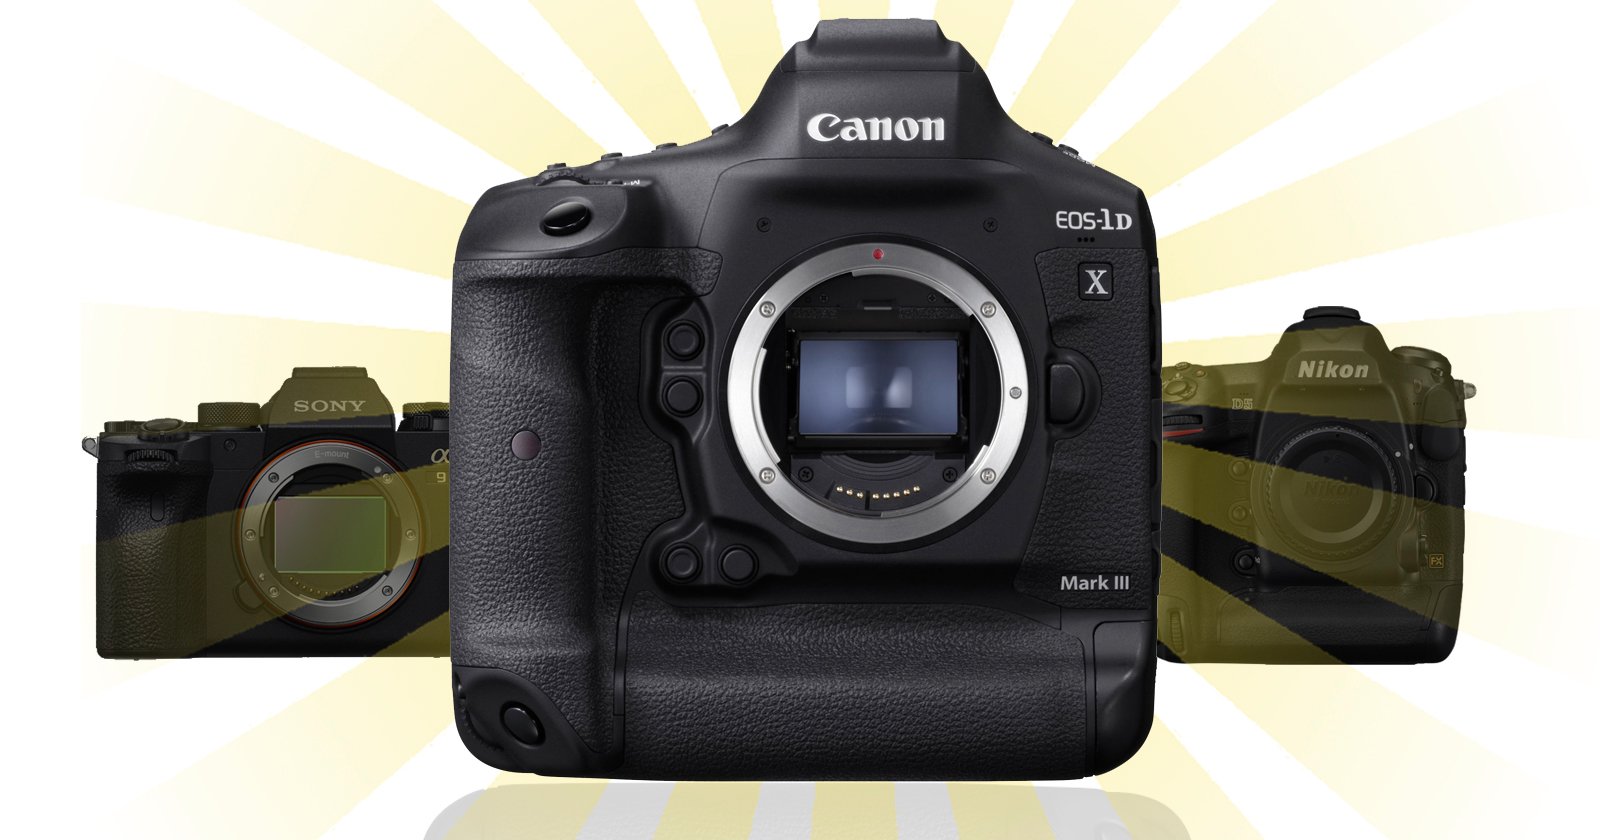 The Canon 1DX Mark III is Shaping Up to be a Killer Mirrorless Camera